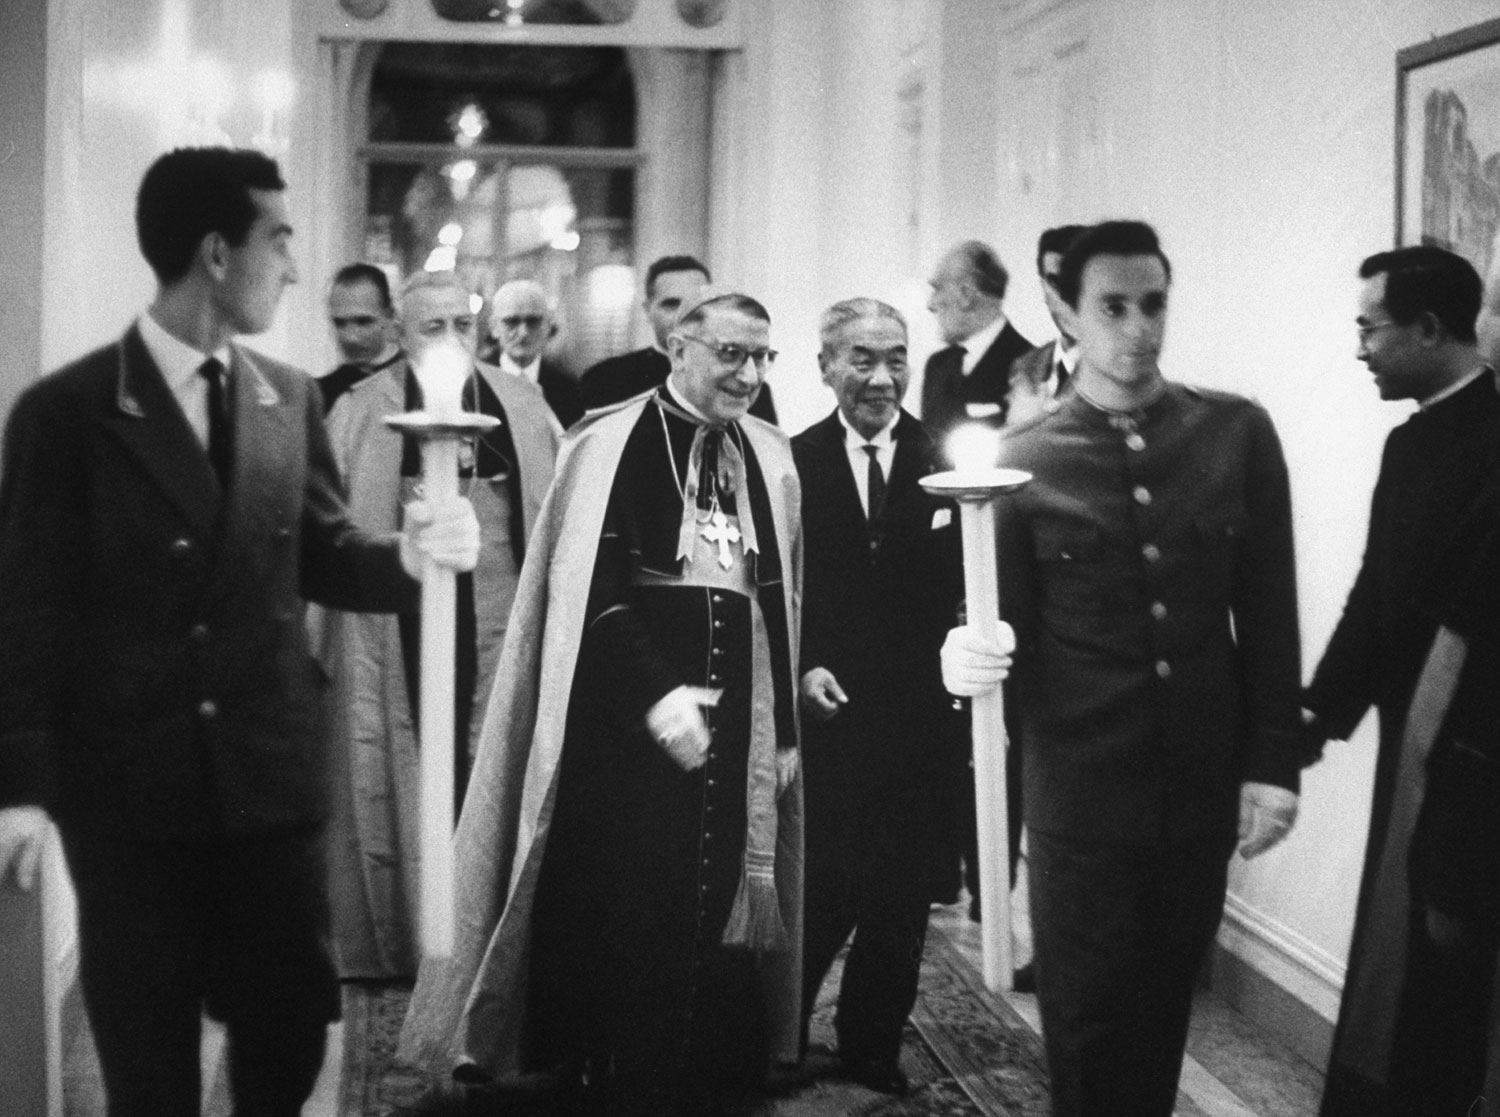 Prelates attend a party at the Chinese Embassy in Vatican City on the eve of Vatican II, 1962.